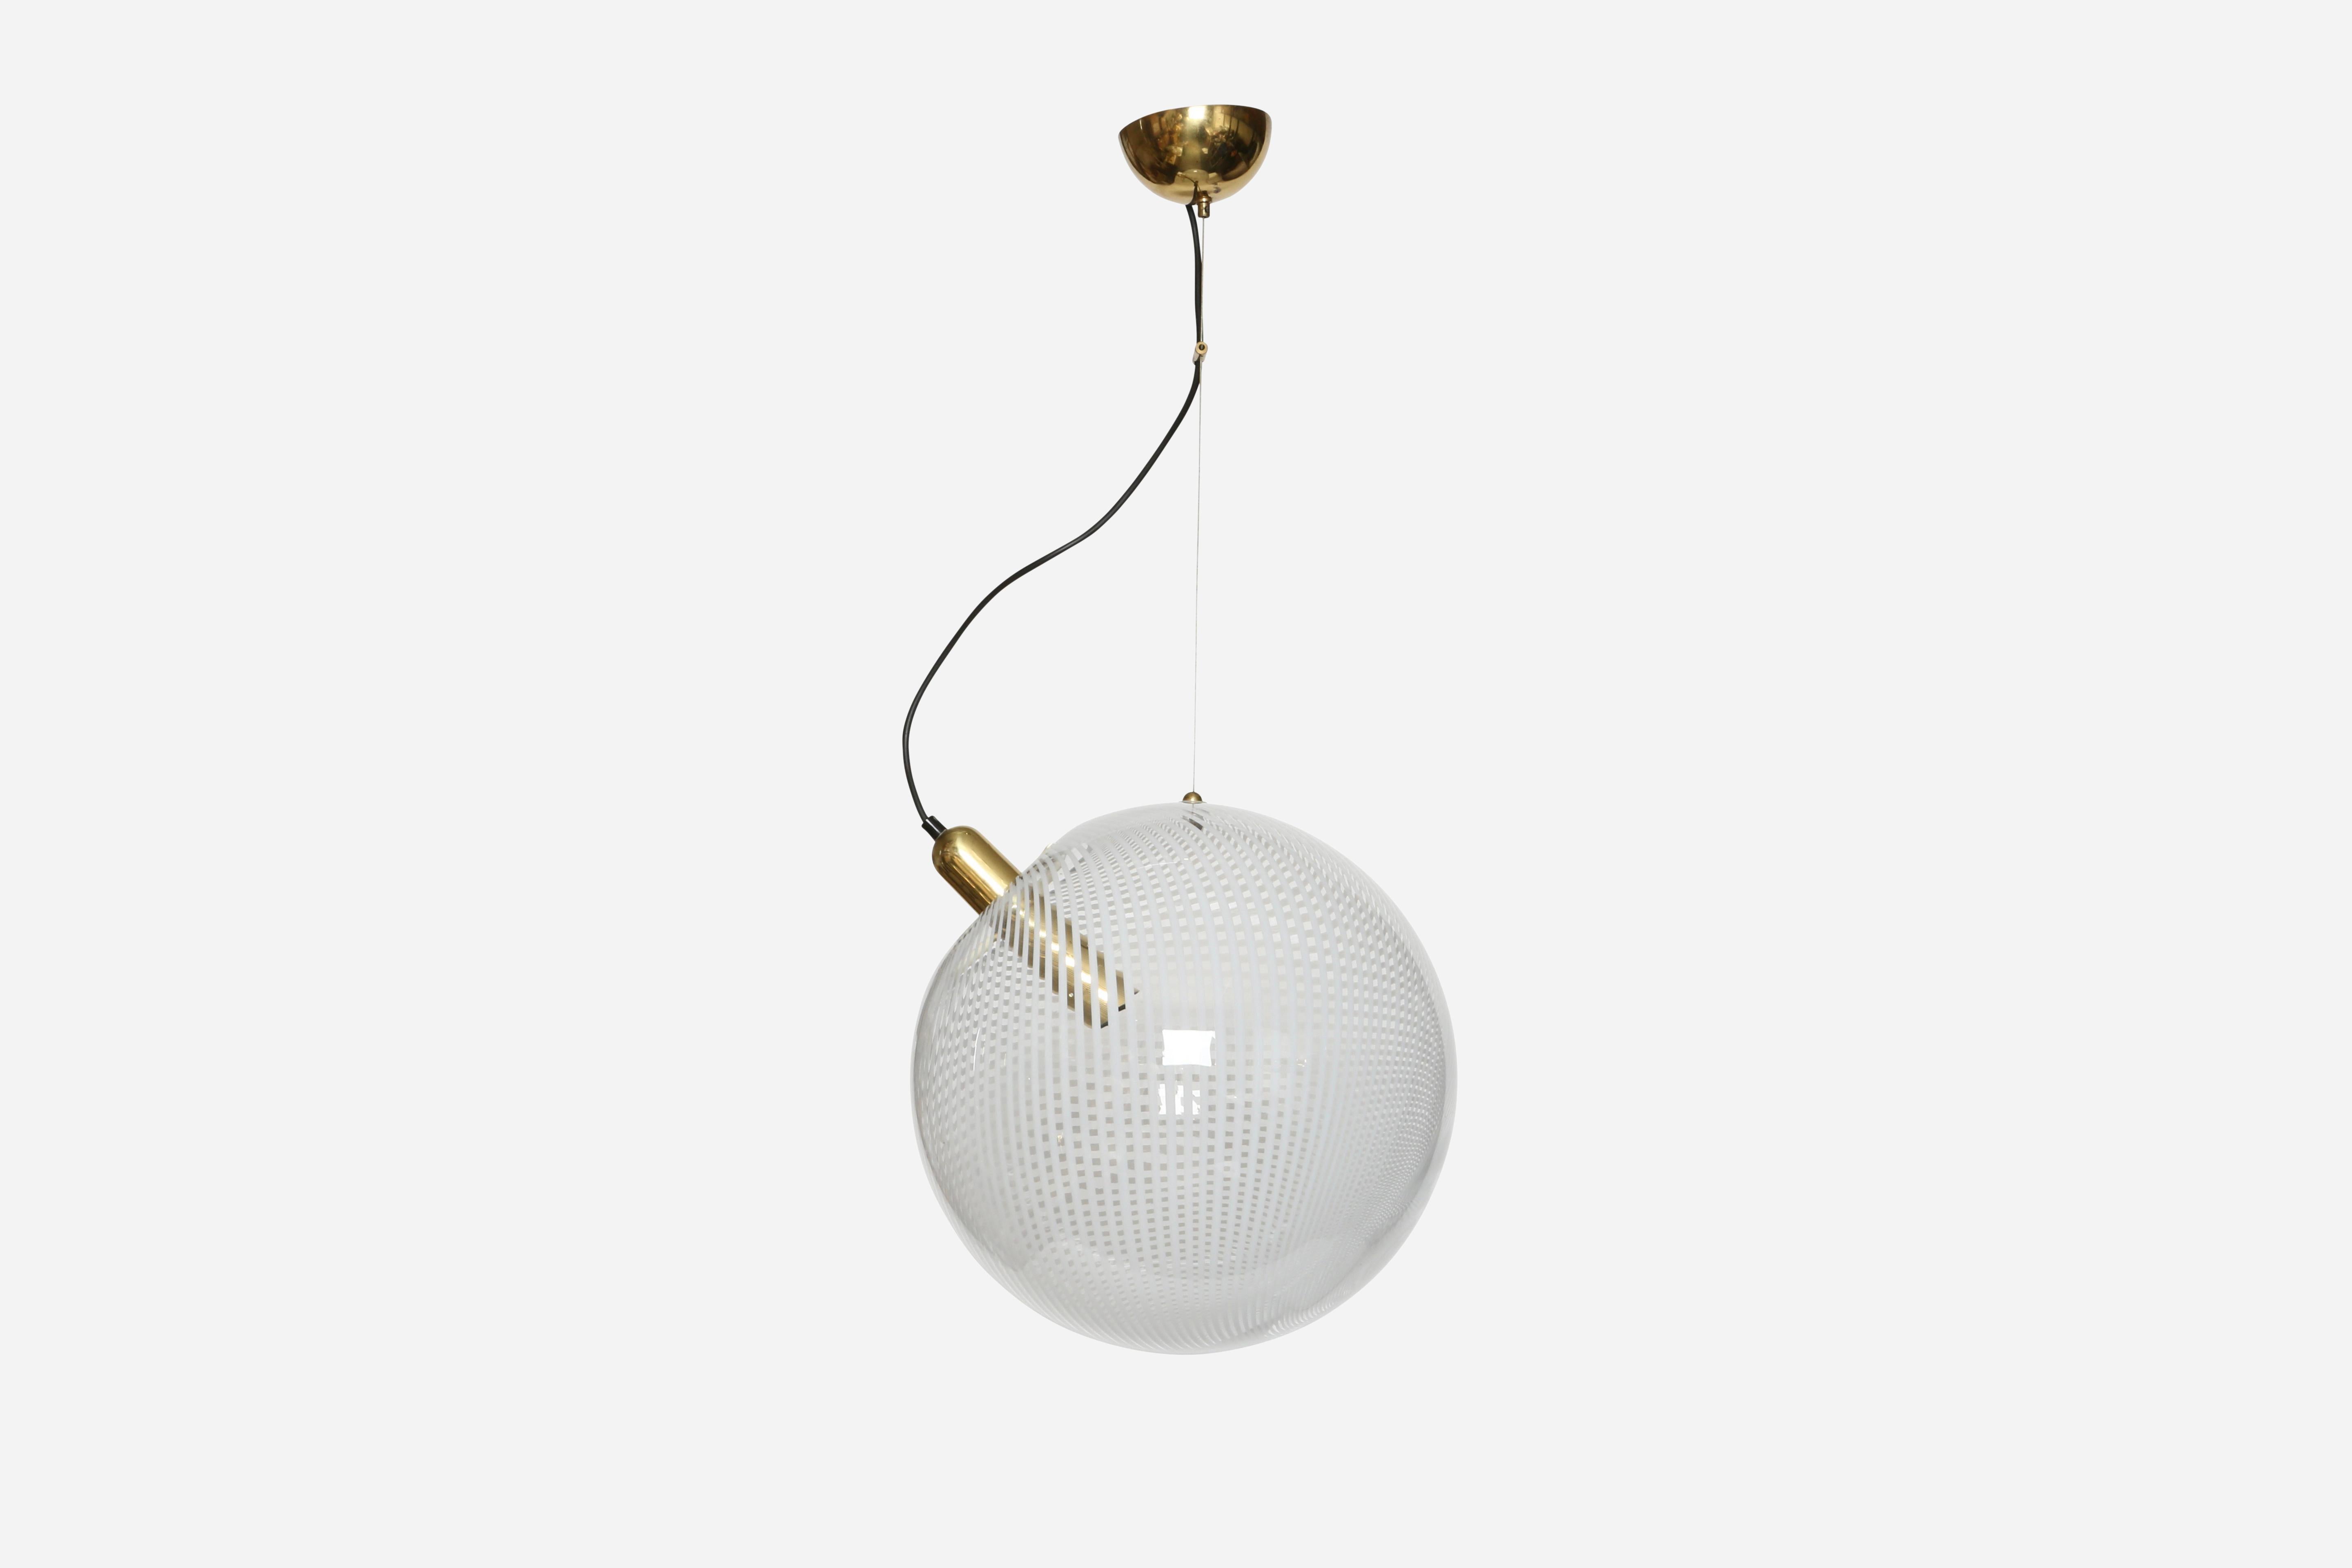 Venini ceiling pendant by Ludovico Diaz De Santillana.
Designed and manufactured in Italy in 1970s.
Reticello glass, brass and plastic glass holder.
Overall drop is adjustable, can be made shorter or longer.
Takes one medium base bulb.
Complimentary